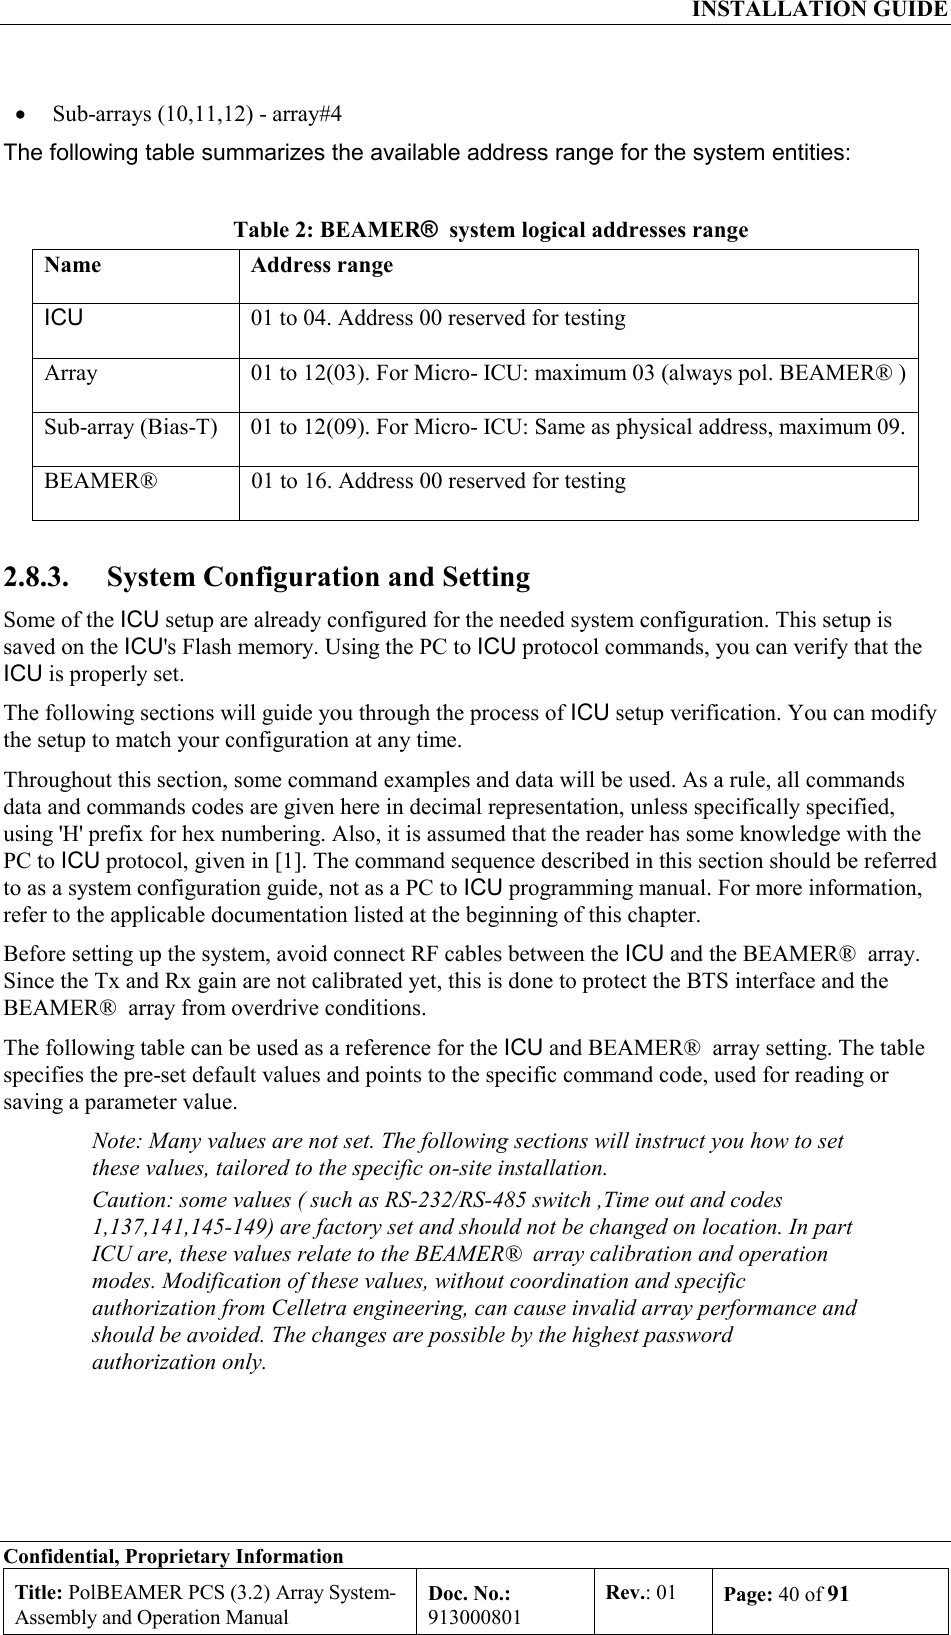  INSTALLATION GUIDE Confidential, Proprietary Information Title: PolBEAMER PCS (3.2) Array System- Assembly and Operation Manual Doc. No.: 913000801 Rev.: 01  Page: 40 of 91  •  Sub-arrays (10,11,12) - array#4 The following table summarizes the available address range for the system entities: Table 2: BEAMER®  system logical addresses range Name Address range ICU  01 to 04. Address 00 reserved for testing Array  01 to 12(03). For Micro- ICU: maximum 03 (always pol. BEAMER® ) Sub-array (Bias-T)  01 to 12(09). For Micro- ICU: Same as physical address, maximum 09. BEAMER®   01 to 16. Address 00 reserved for testing 2.8.3.  System Configuration and Setting  Some of the ICU setup are already configured for the needed system configuration. This setup is saved on the ICU&apos;s Flash memory. Using the PC to ICU protocol commands, you can verify that the ICU is properly set.  The following sections will guide you through the process of ICU setup verification. You can modify the setup to match your configuration at any time.  Throughout this section, some command examples and data will be used. As a rule, all commands data and commands codes are given here in decimal representation, unless specifically specified, using &apos;H&apos; prefix for hex numbering. Also, it is assumed that the reader has some knowledge with the PC to ICU protocol, given in [1]. The command sequence described in this section should be referred to as a system configuration guide, not as a PC to ICU programming manual. For more information, refer to the applicable documentation listed at the beginning of this chapter. Before setting up the system, avoid connect RF cables between the ICU and the BEAMER®  array. Since the Tx and Rx gain are not calibrated yet, this is done to protect the BTS interface and the BEAMER®  array from overdrive conditions. The following table can be used as a reference for the ICU and BEAMER®  array setting. The table specifies the pre-set default values and points to the specific command code, used for reading or saving a parameter value. Note: Many values are not set. The following sections will instruct you how to set these values, tailored to the specific on-site installation. Caution: some values ( such as RS-232/RS-485 switch ,Time out and codes 1,137,141,145-149) are factory set and should not be changed on location. In part ICU are, these values relate to the BEAMER®  array calibration and operation modes. Modification of these values, without coordination and specific authorization from Celletra engineering, can cause invalid array performance and should be avoided. The changes are possible by the highest password authorization only.  